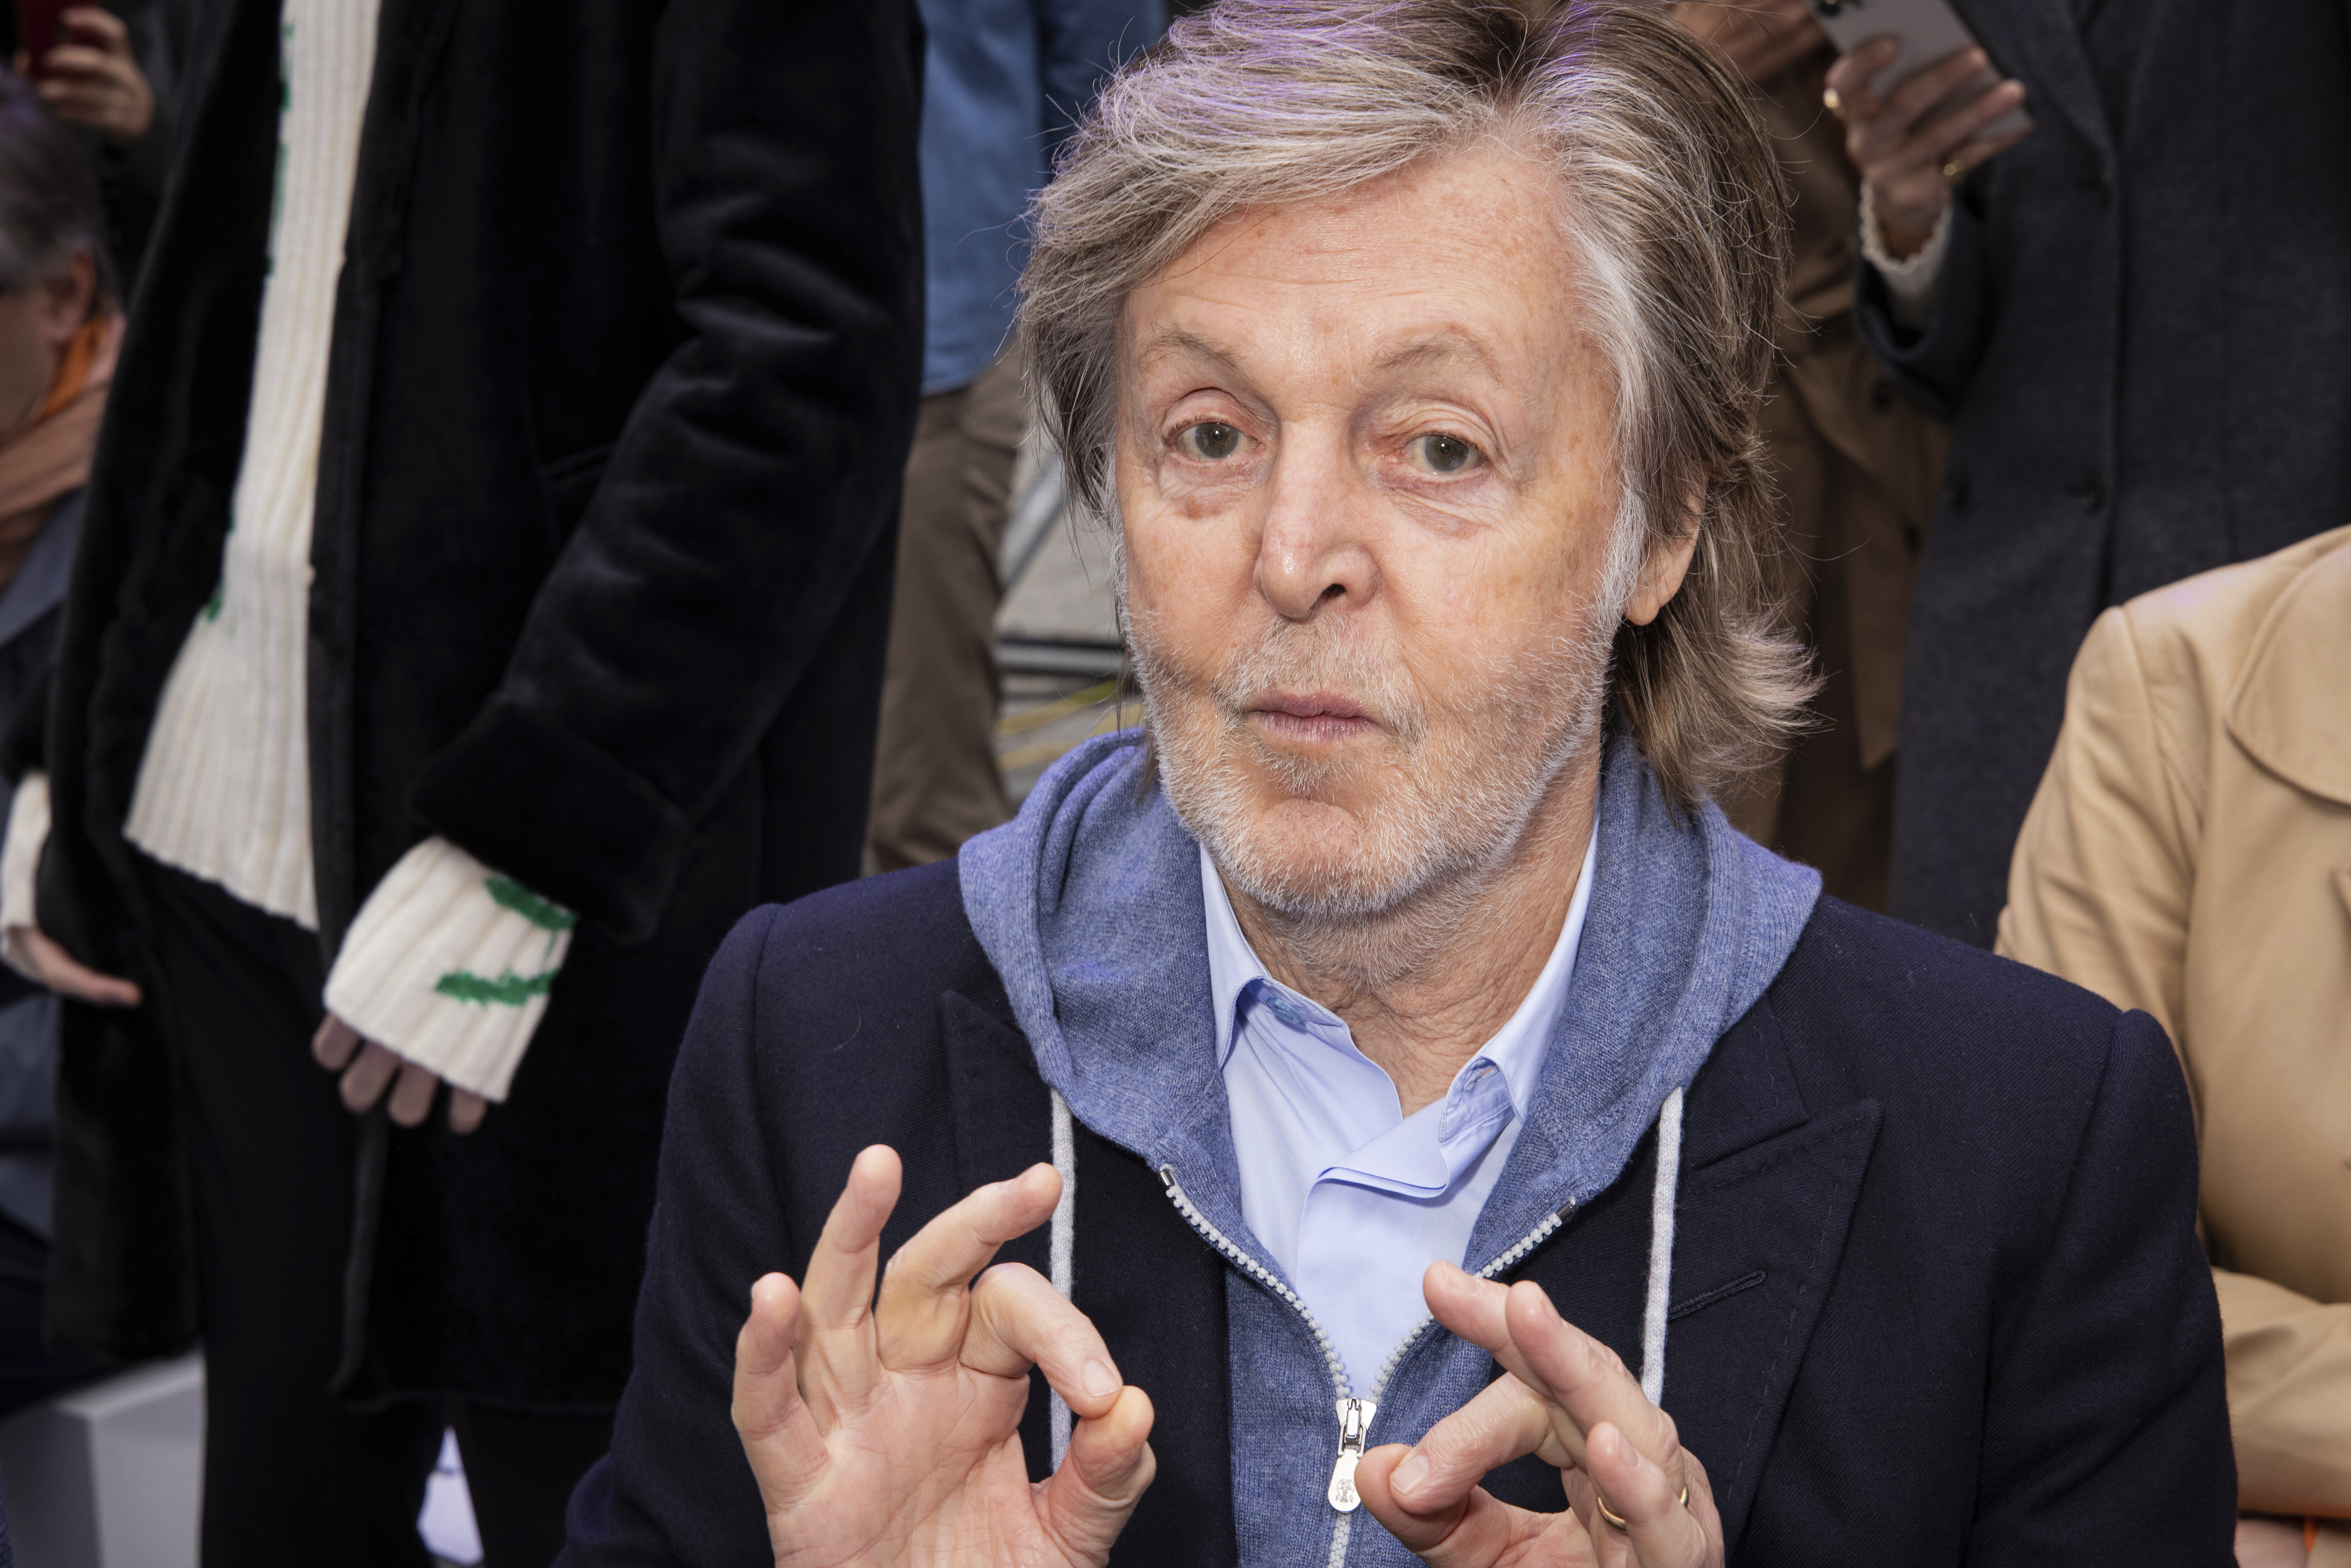 Paul McCartney Now Thinks ‘Yesterday’ May Have A Totally Different Meaning | HuffPost Entertainment